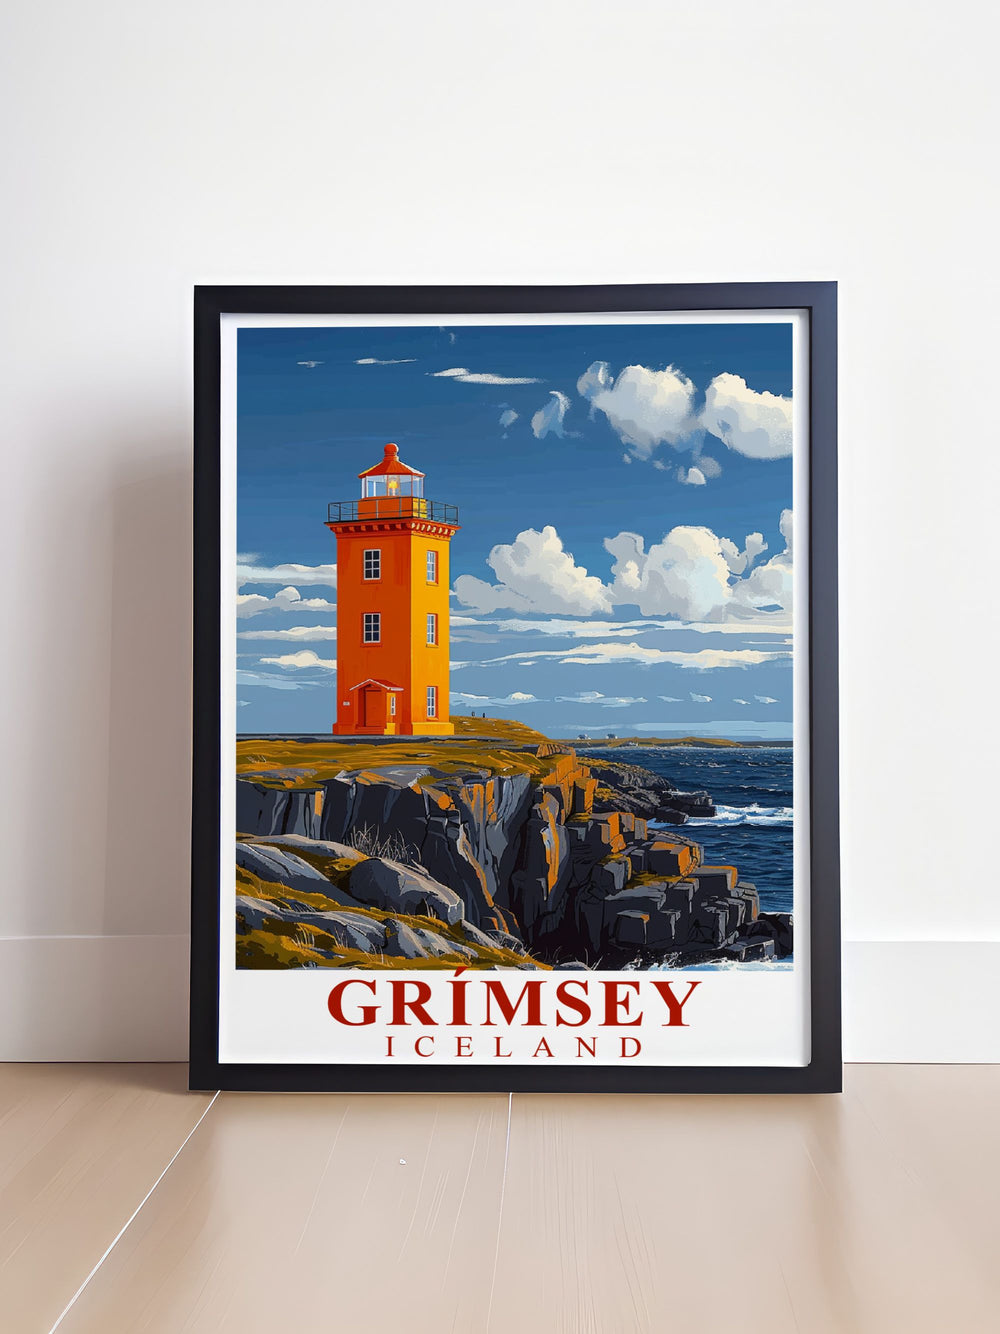 Showcasing the enchanting Northern Lights over Grimsey, this travel poster brings the magical beauty of the Aurora Borealis into your living space, perfect for creating a serene atmosphere.